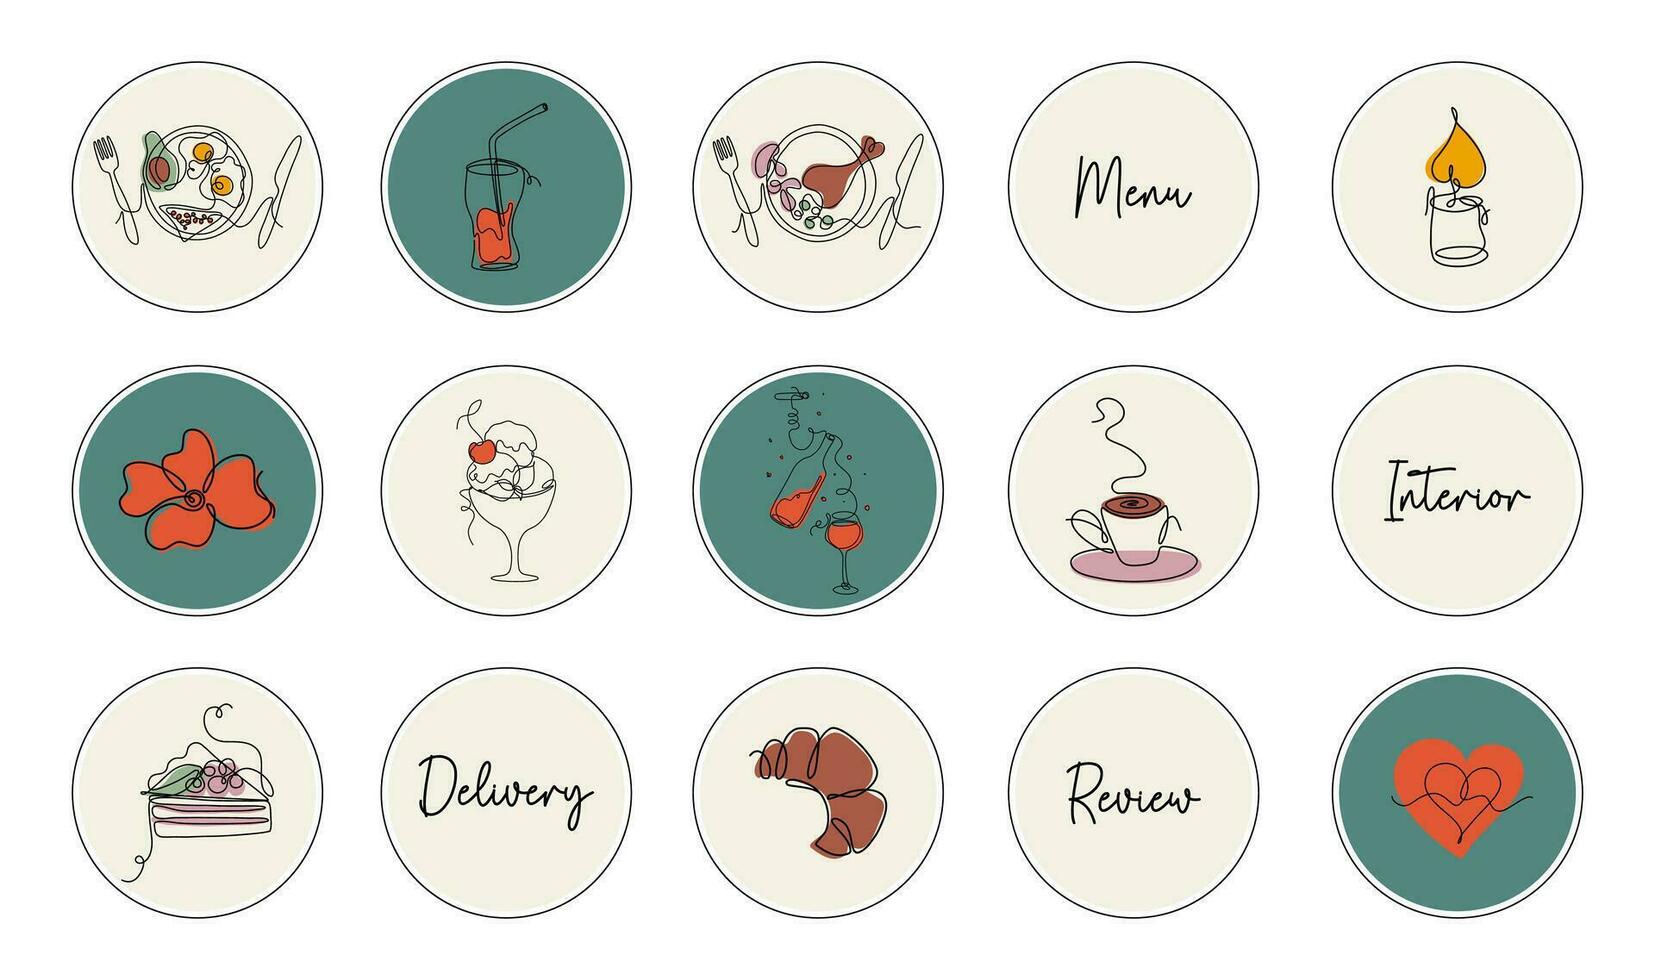 Vector pictograms. Social media Highlights covers. Cute icons for restaurant, cafe or bar. Line art style illustrations.